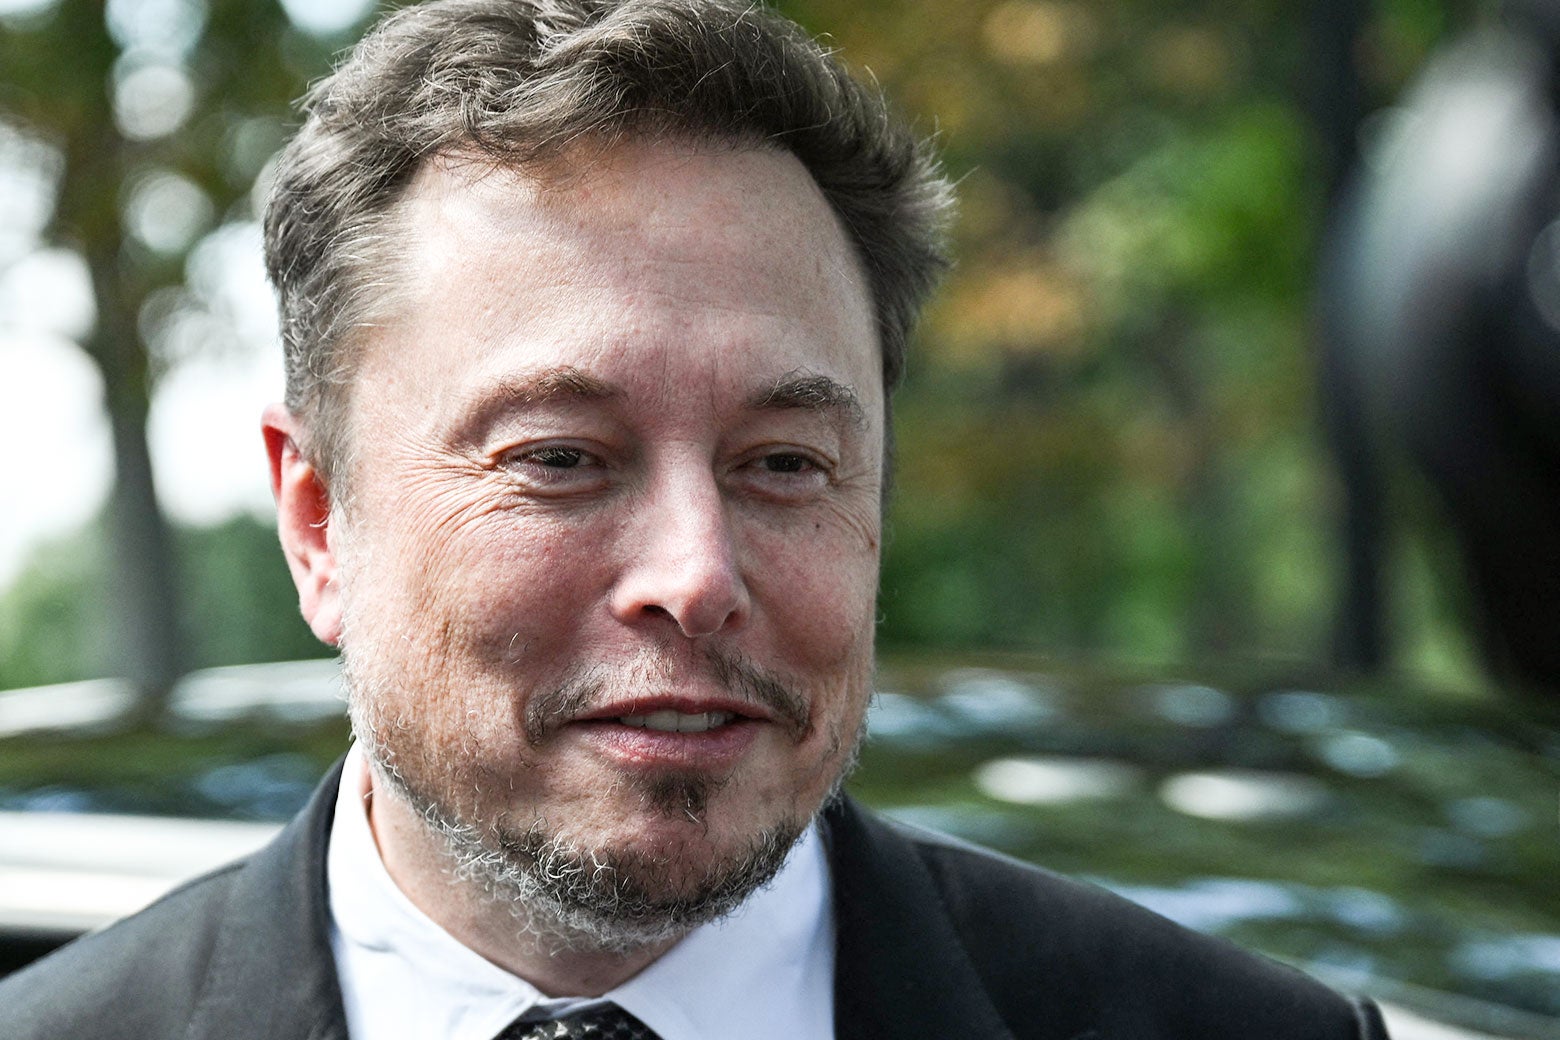 Elon Musk doesn’t tell us much about Elon Musk, but it just might tell you plenty about your next boss.